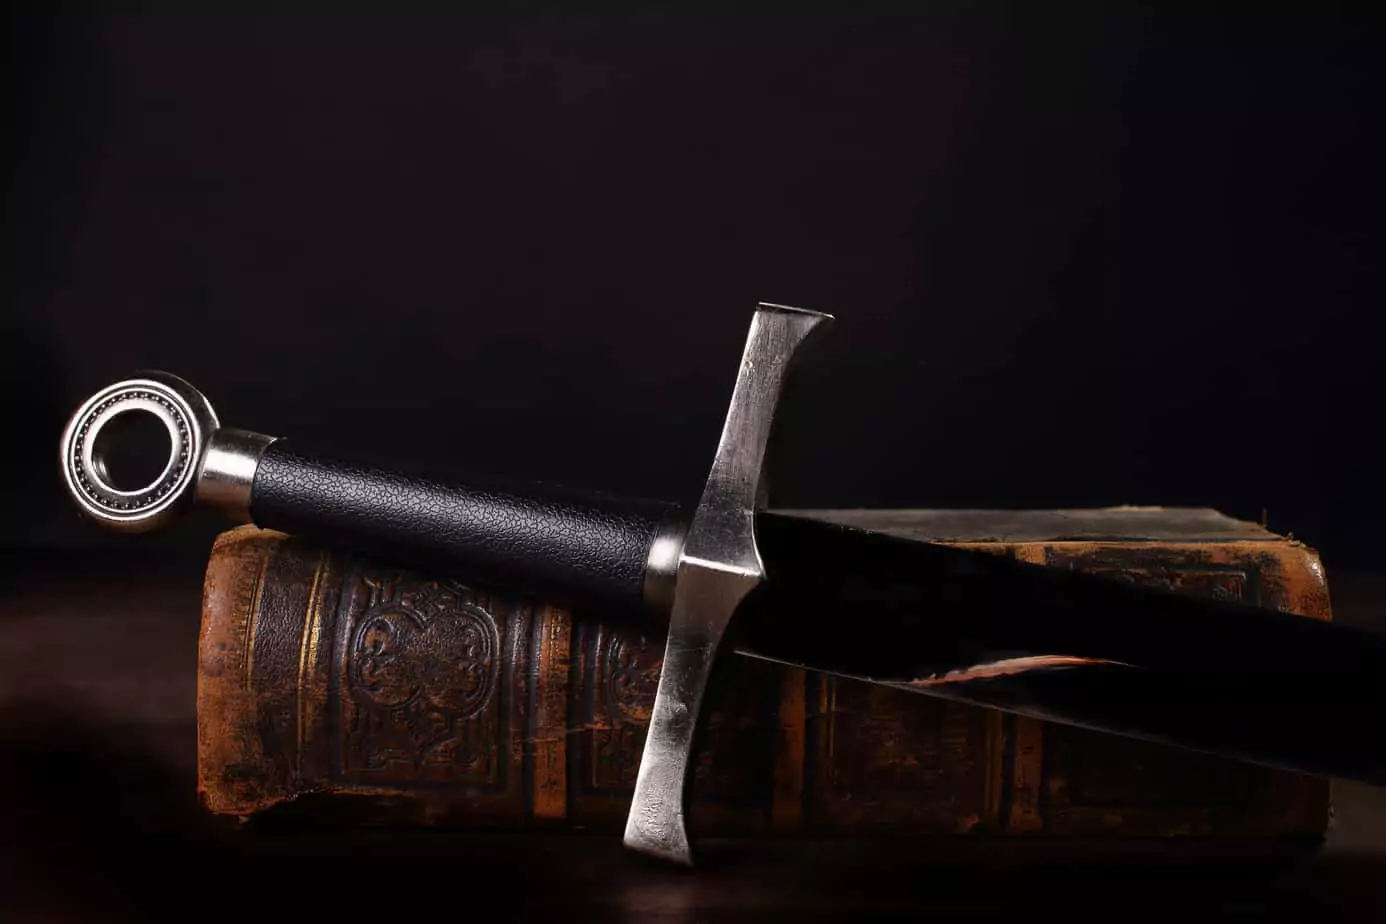 book and sword